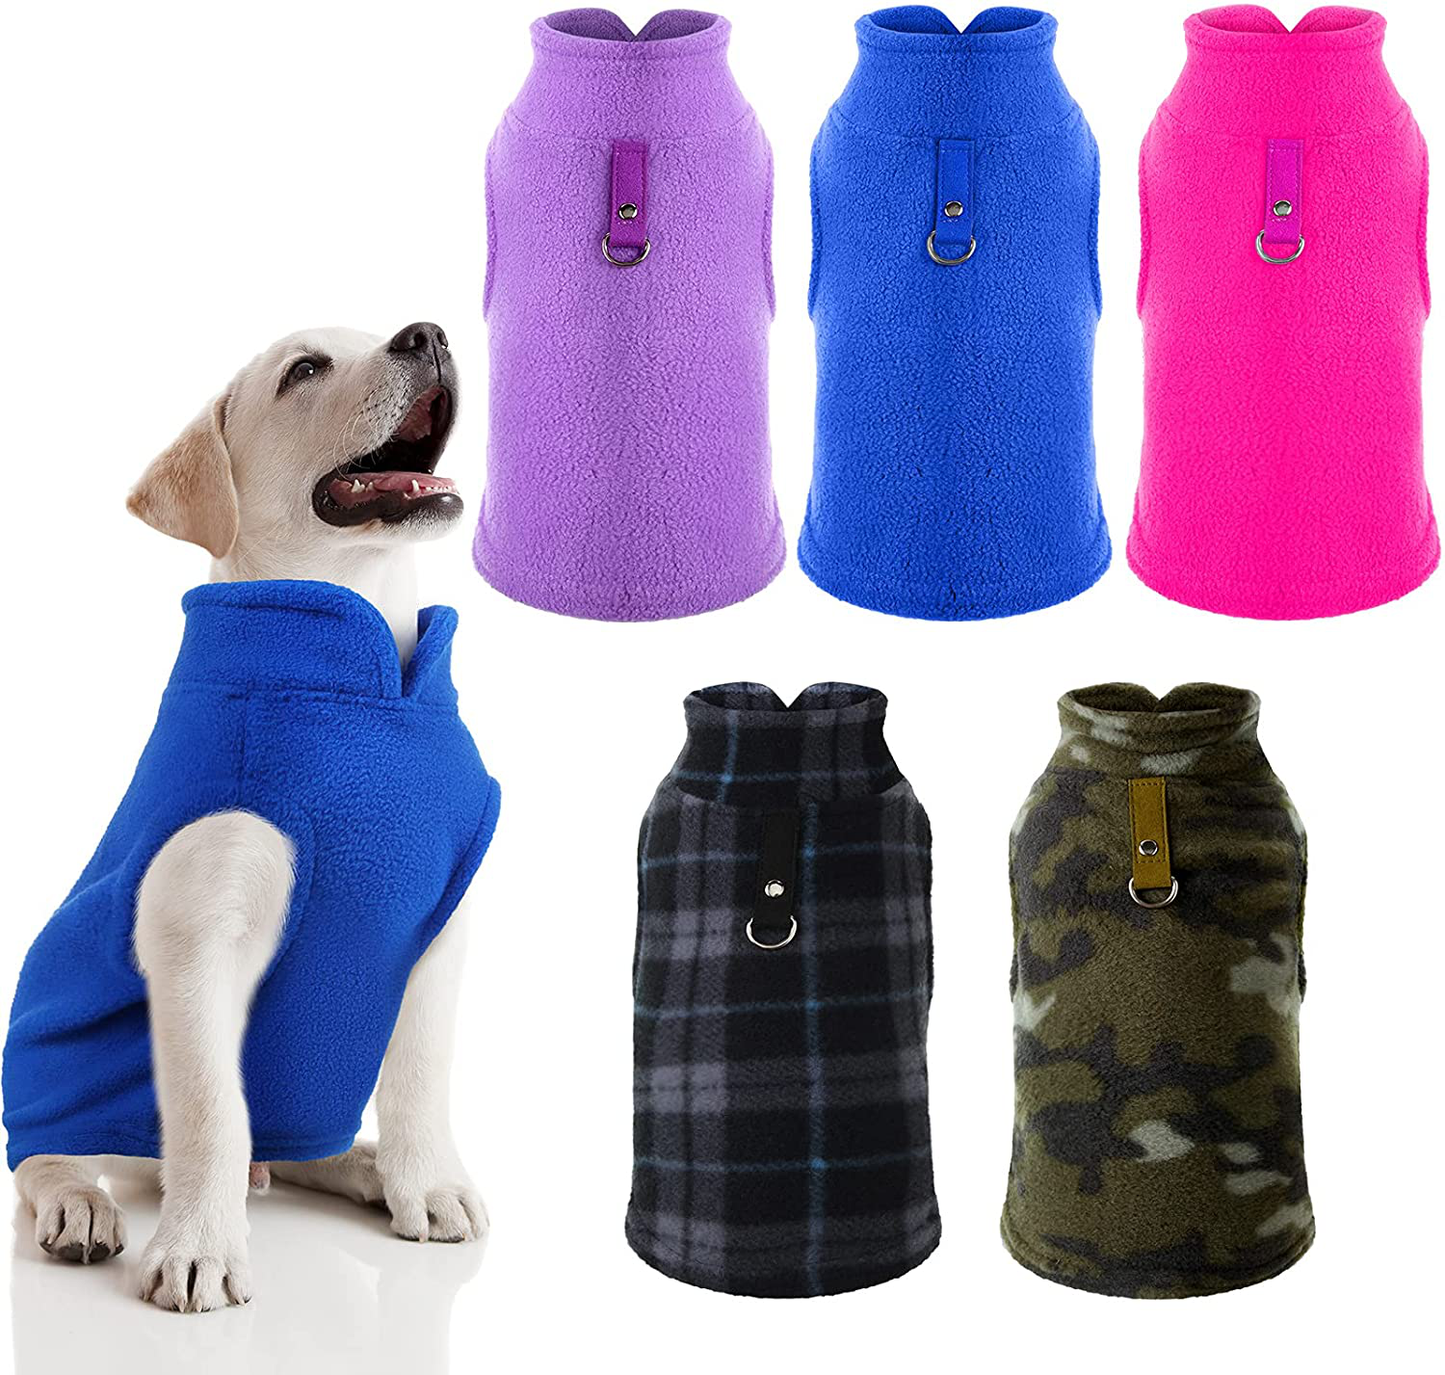 Hamify 5 Pieces Pet Winter Clothes Fleece Vest Dog Sweater with Leash Ring Warm Pullover Dog Jacket for Winter Small Dog Sweater Coat Cold Weather Pet Clothes Indoor Outdoor Use